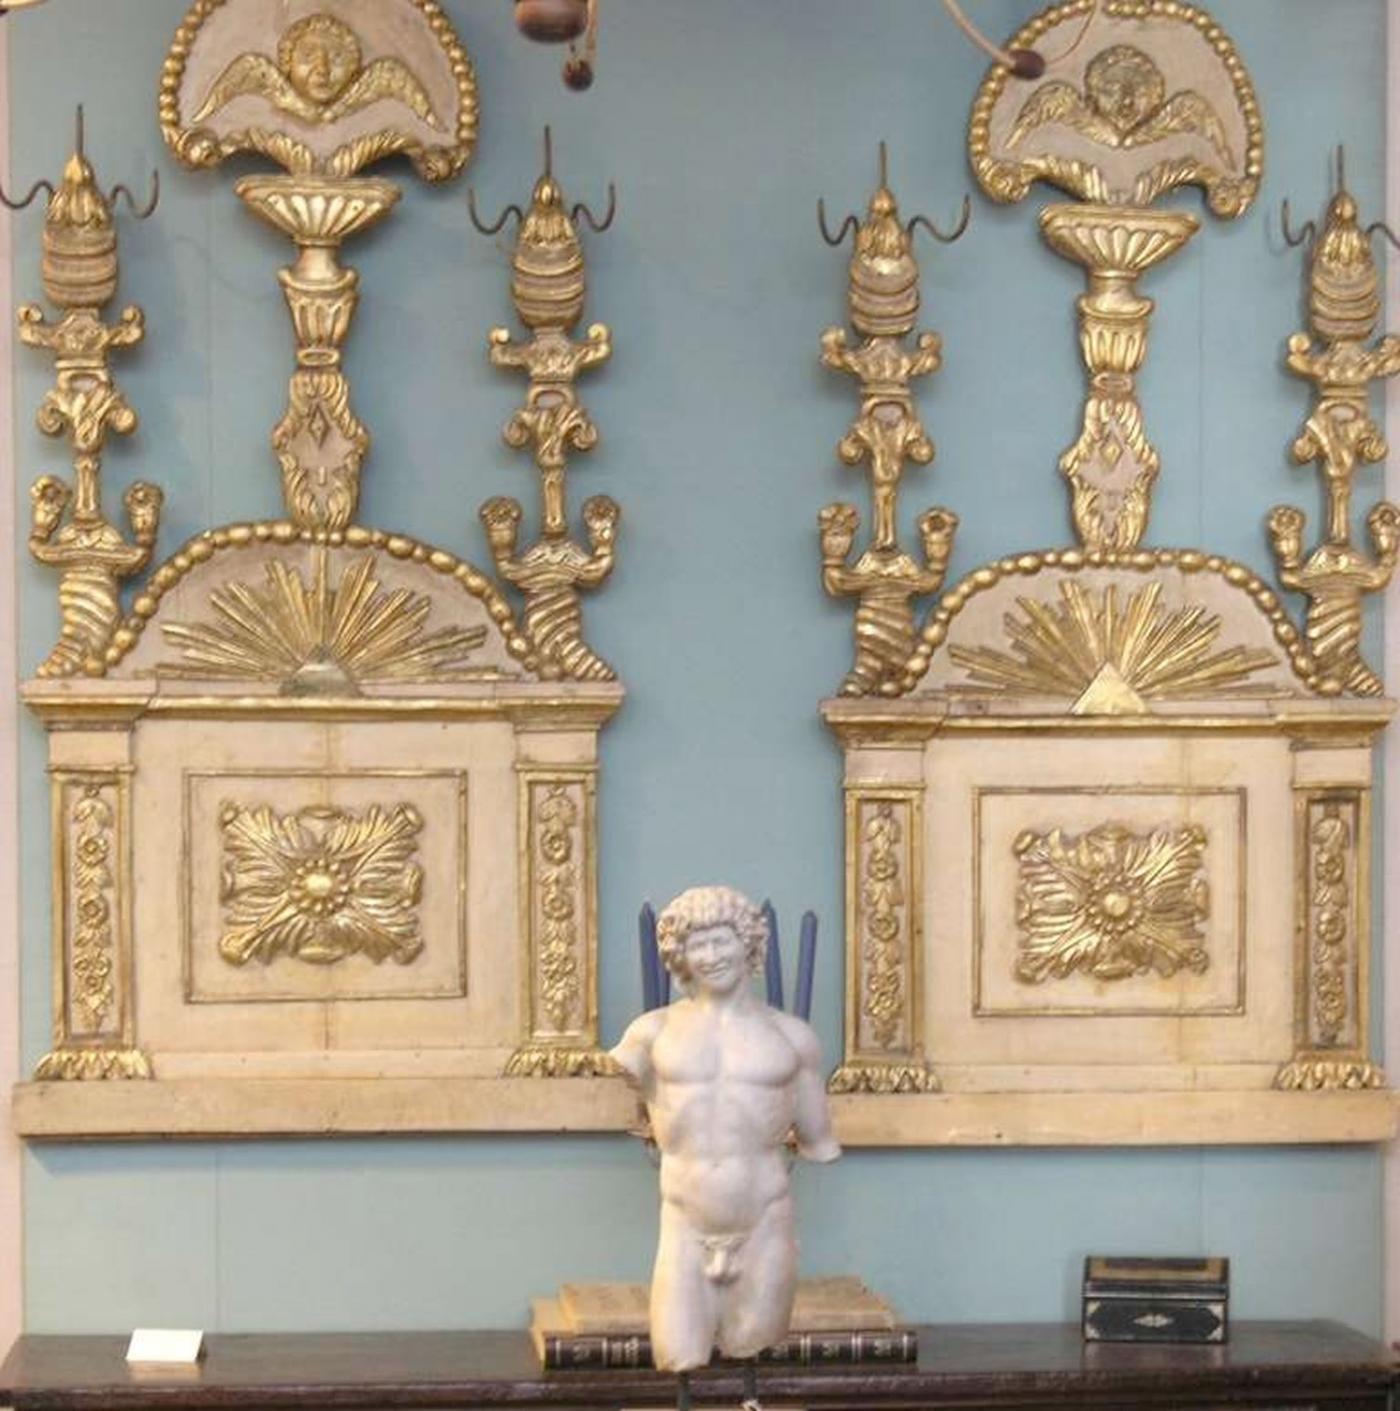 Pair of Italian painted and parcel gilt panels. Bouquet finial supported by cherub in beaded frame , Three carved vertical columns of twisting floral forms. Carved sunburst pattern above central square framed with pilasters